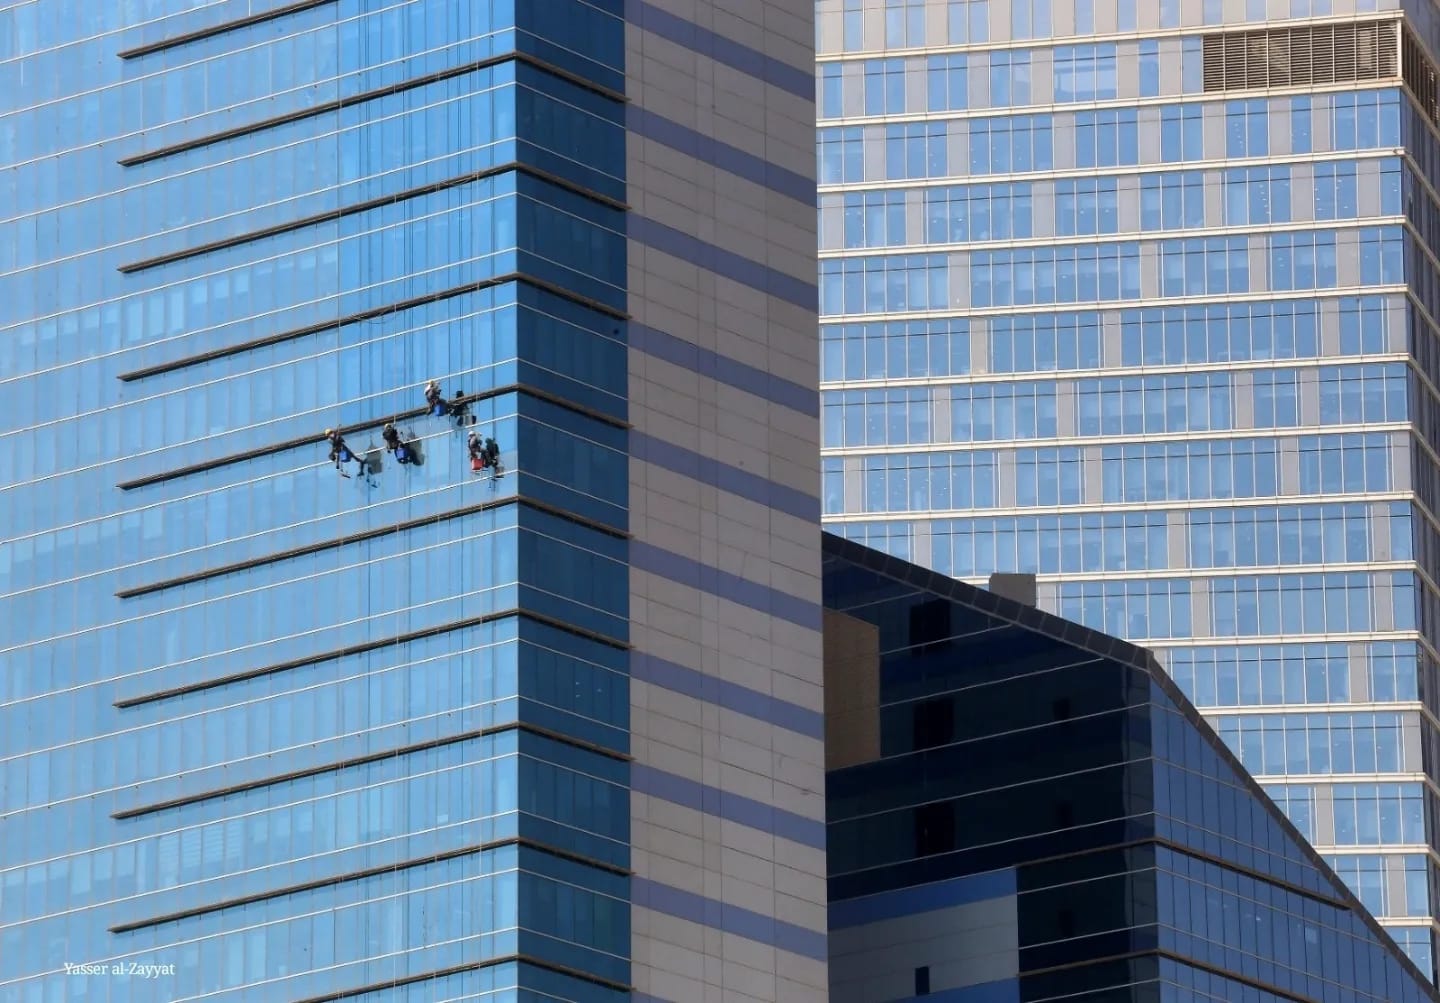 KUWAIT: Workers clean the windows of a high-rise building in Kuwait City. — Photo by Yasser Al-Zayyat.n